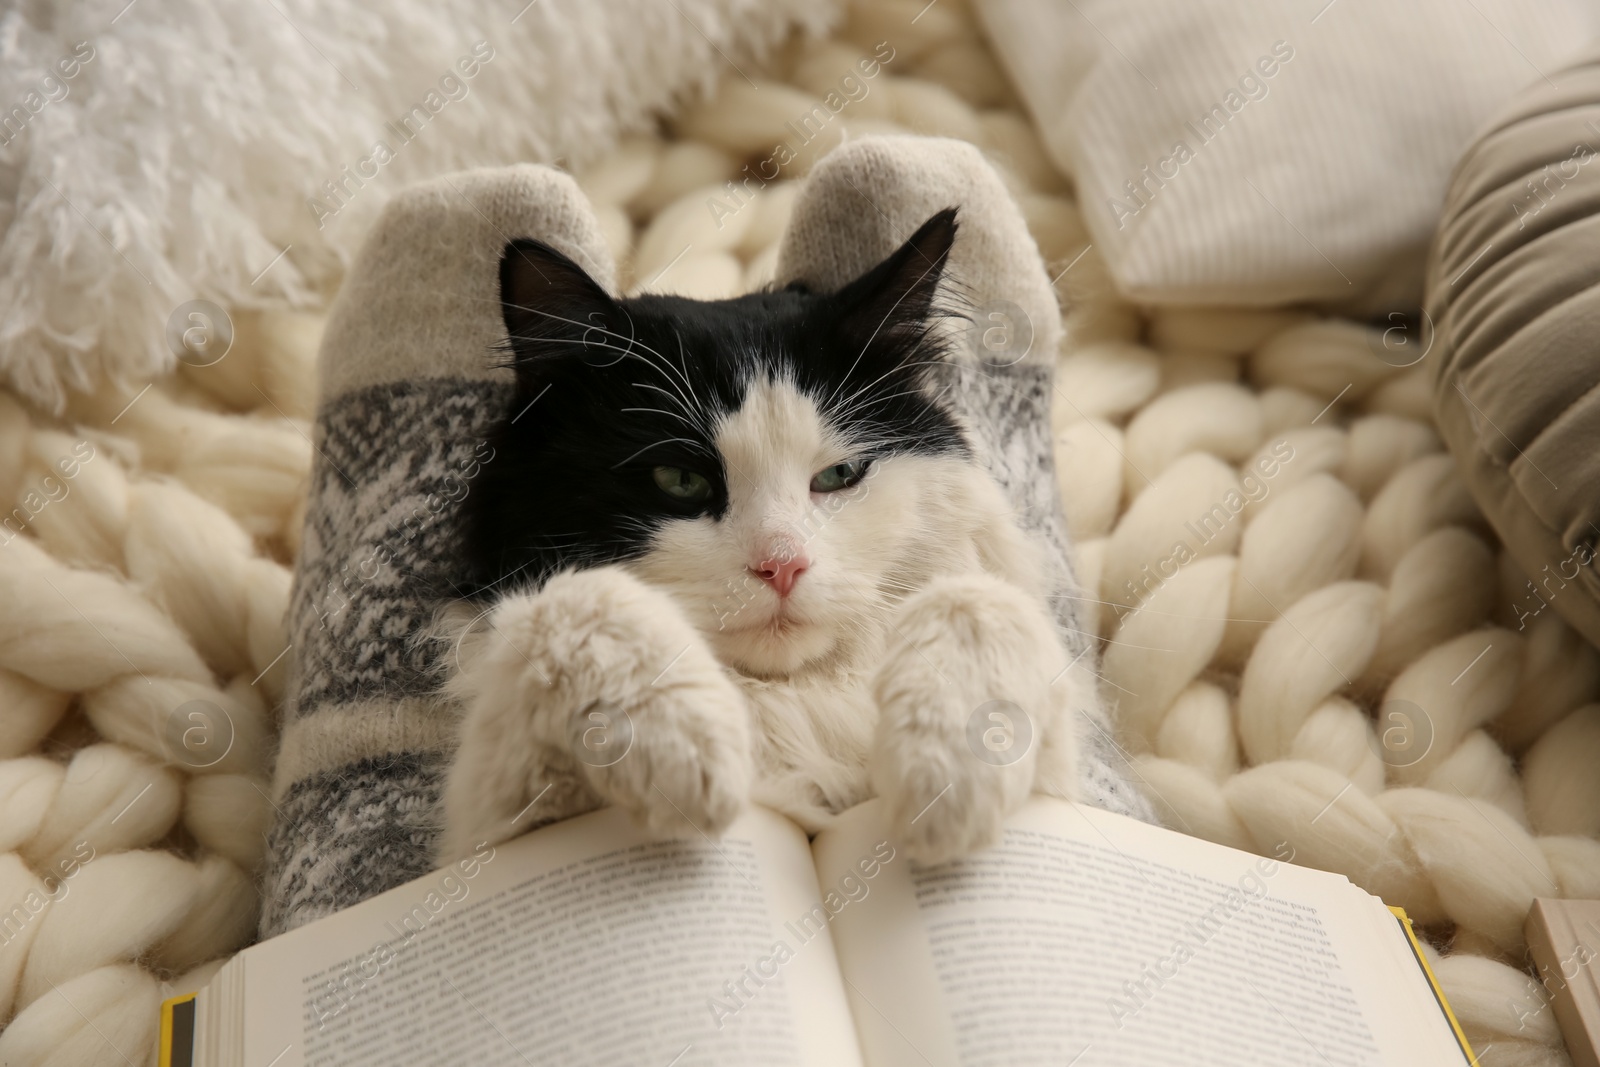 Photo of Woman holding adorable cat and open book on knitted blanket, closeup